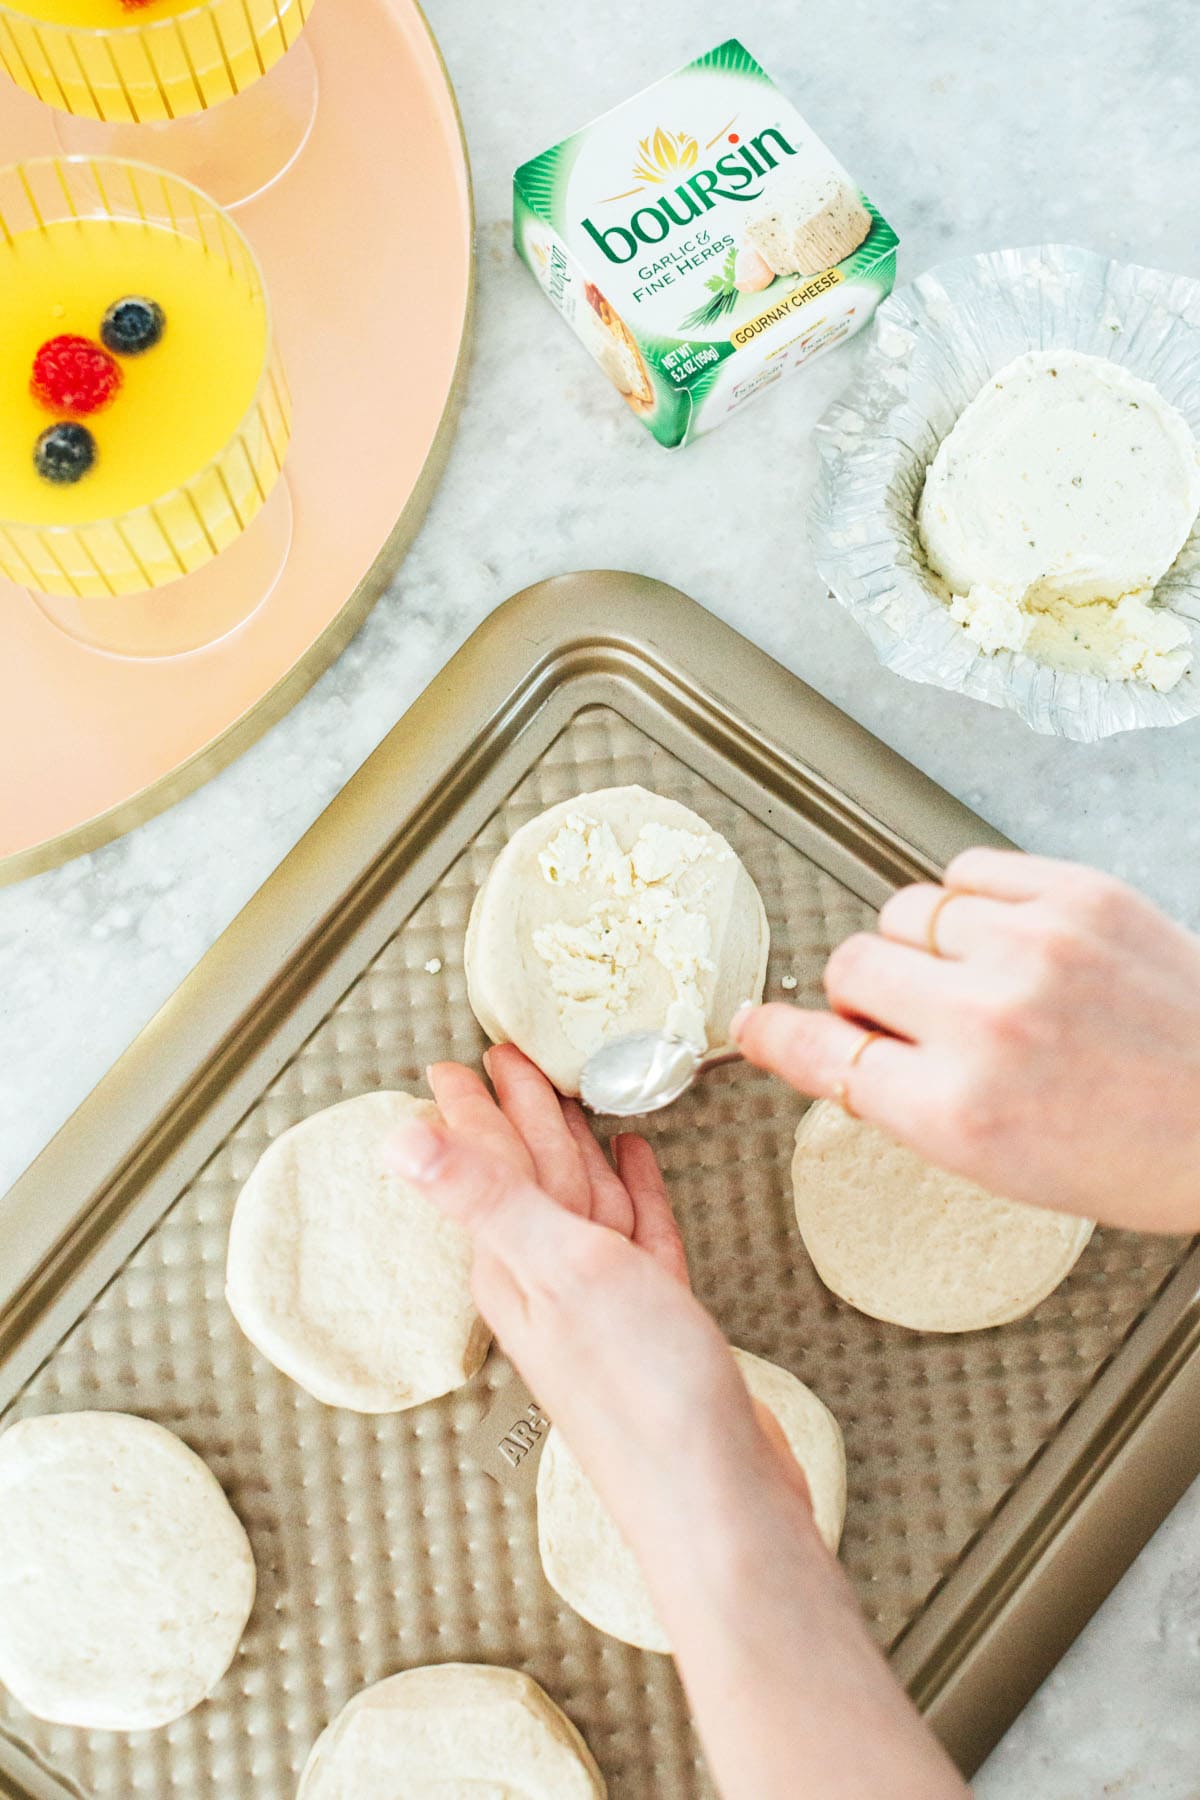 Real Entertaining: Easy Garlic & Herb Cheese Biscuits + Our Family Brunch!